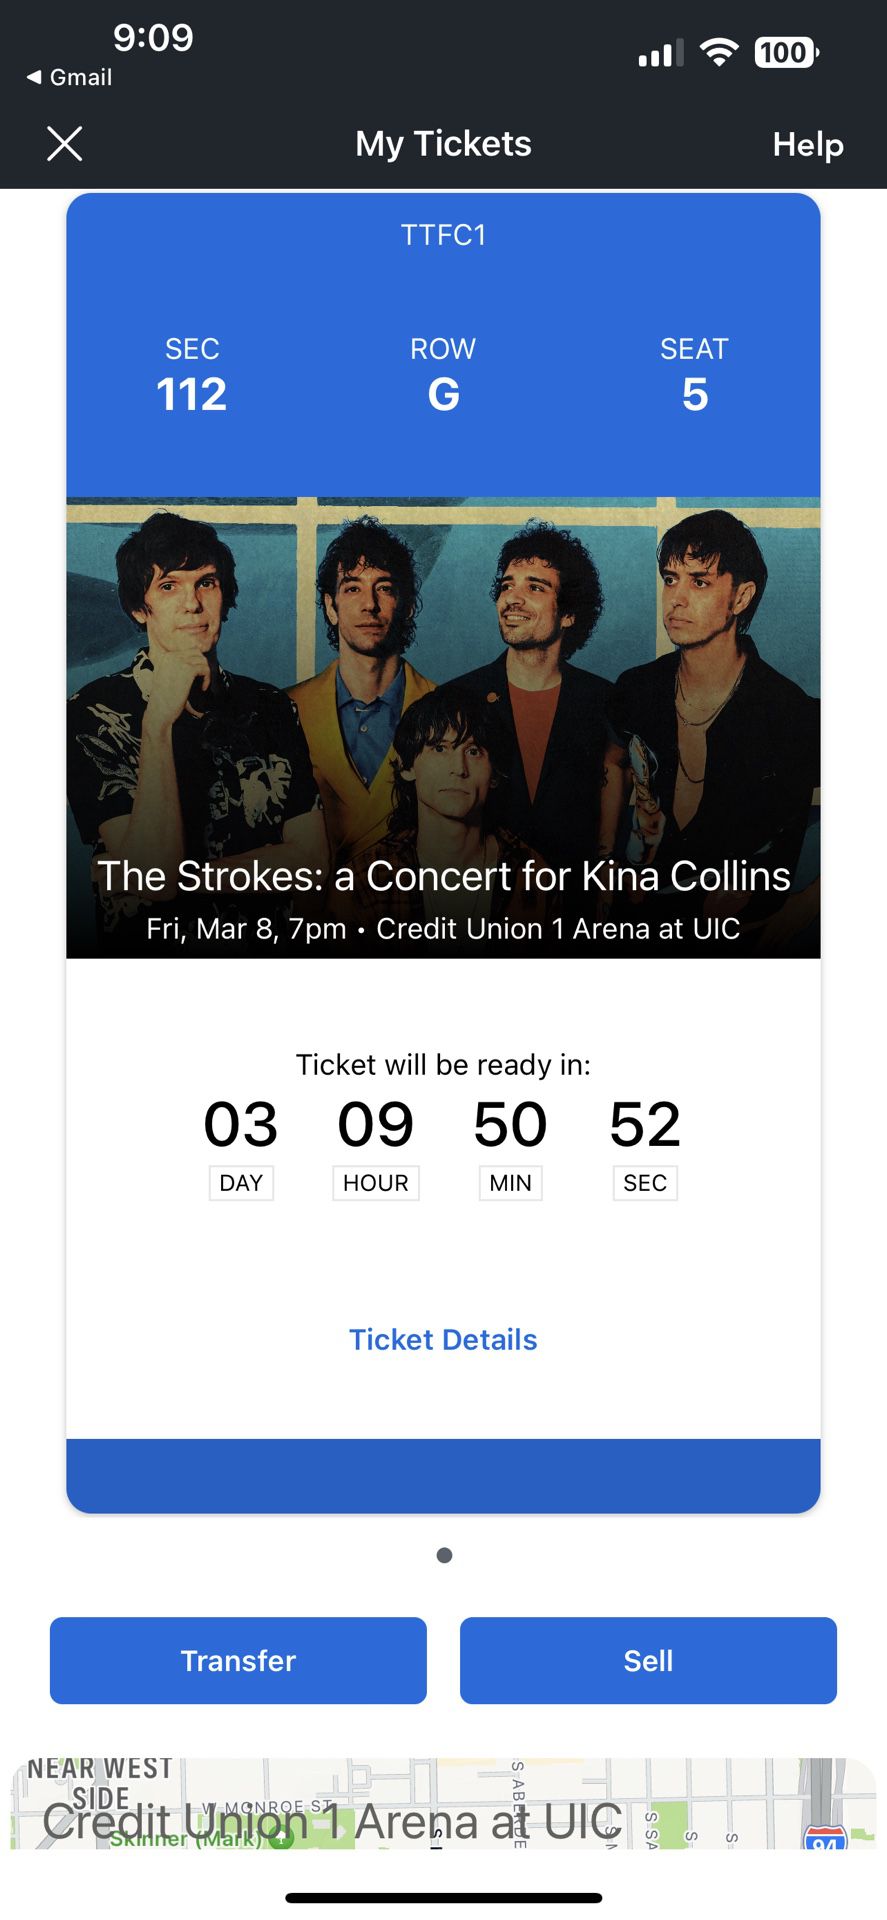 The Strokes Cincert Ticket March 8th